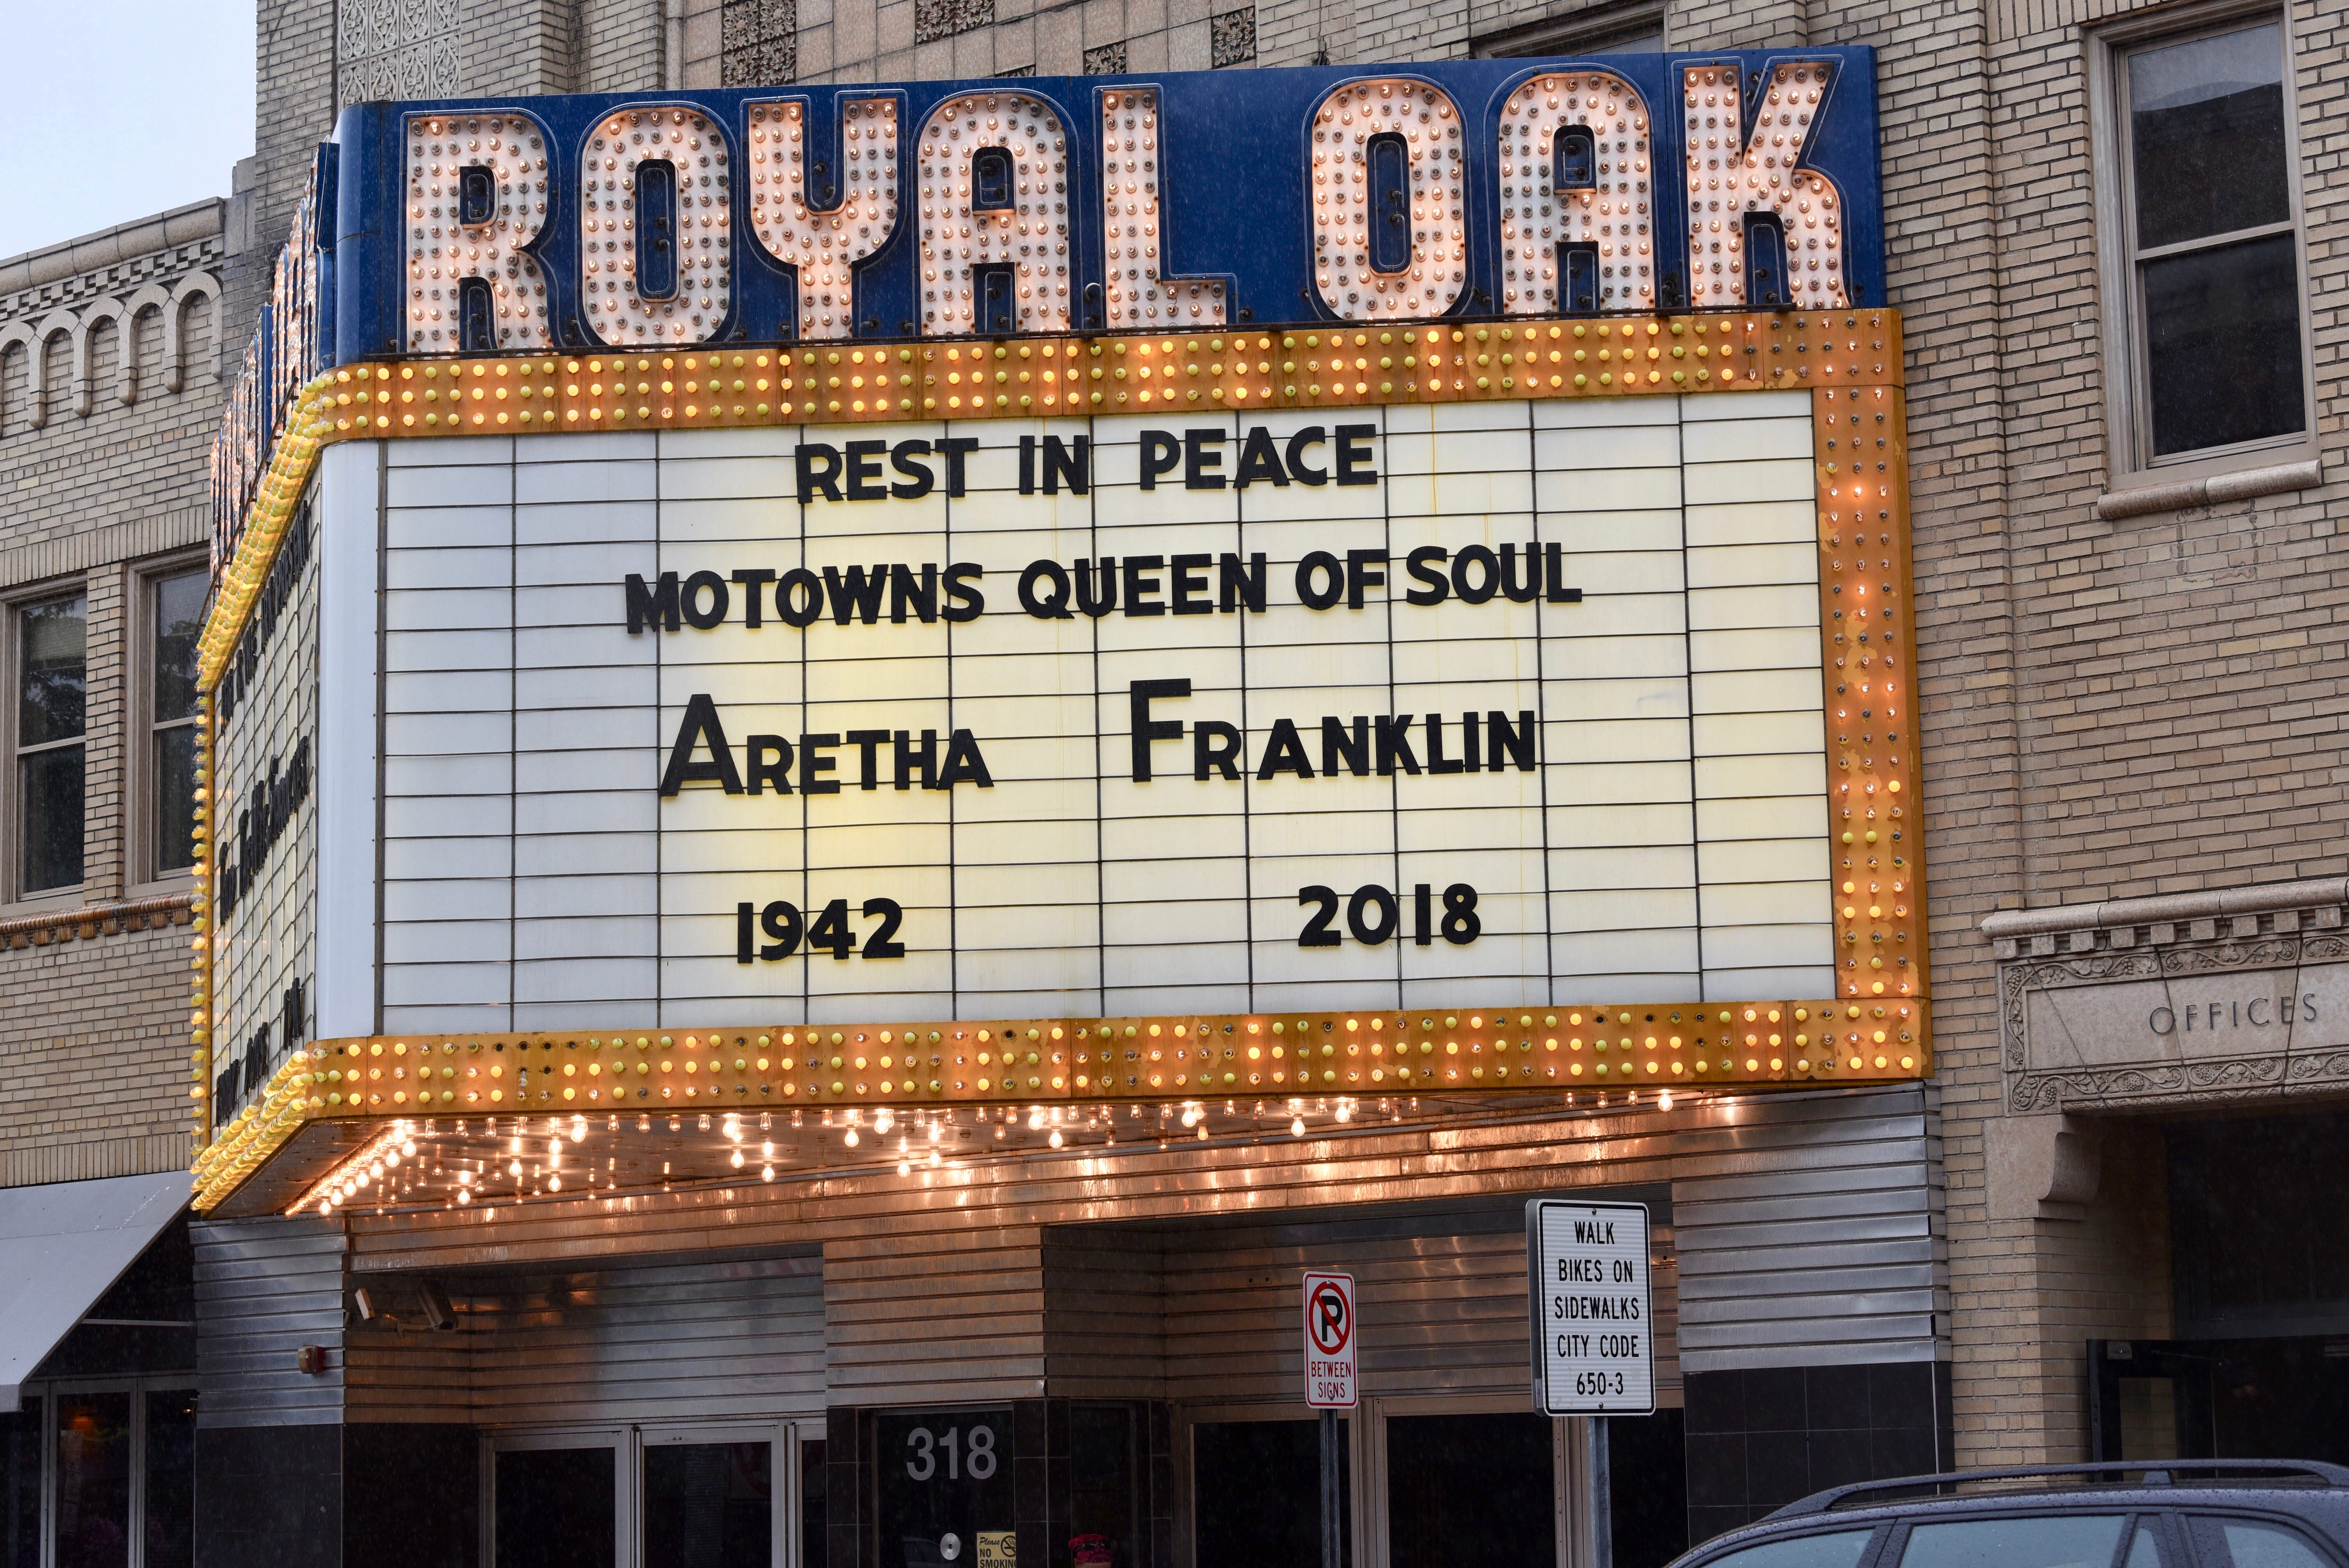 The marquee at the Royal Oak Music Theatre celebrates the life of the Queen of Soul, Aretha Franklin.